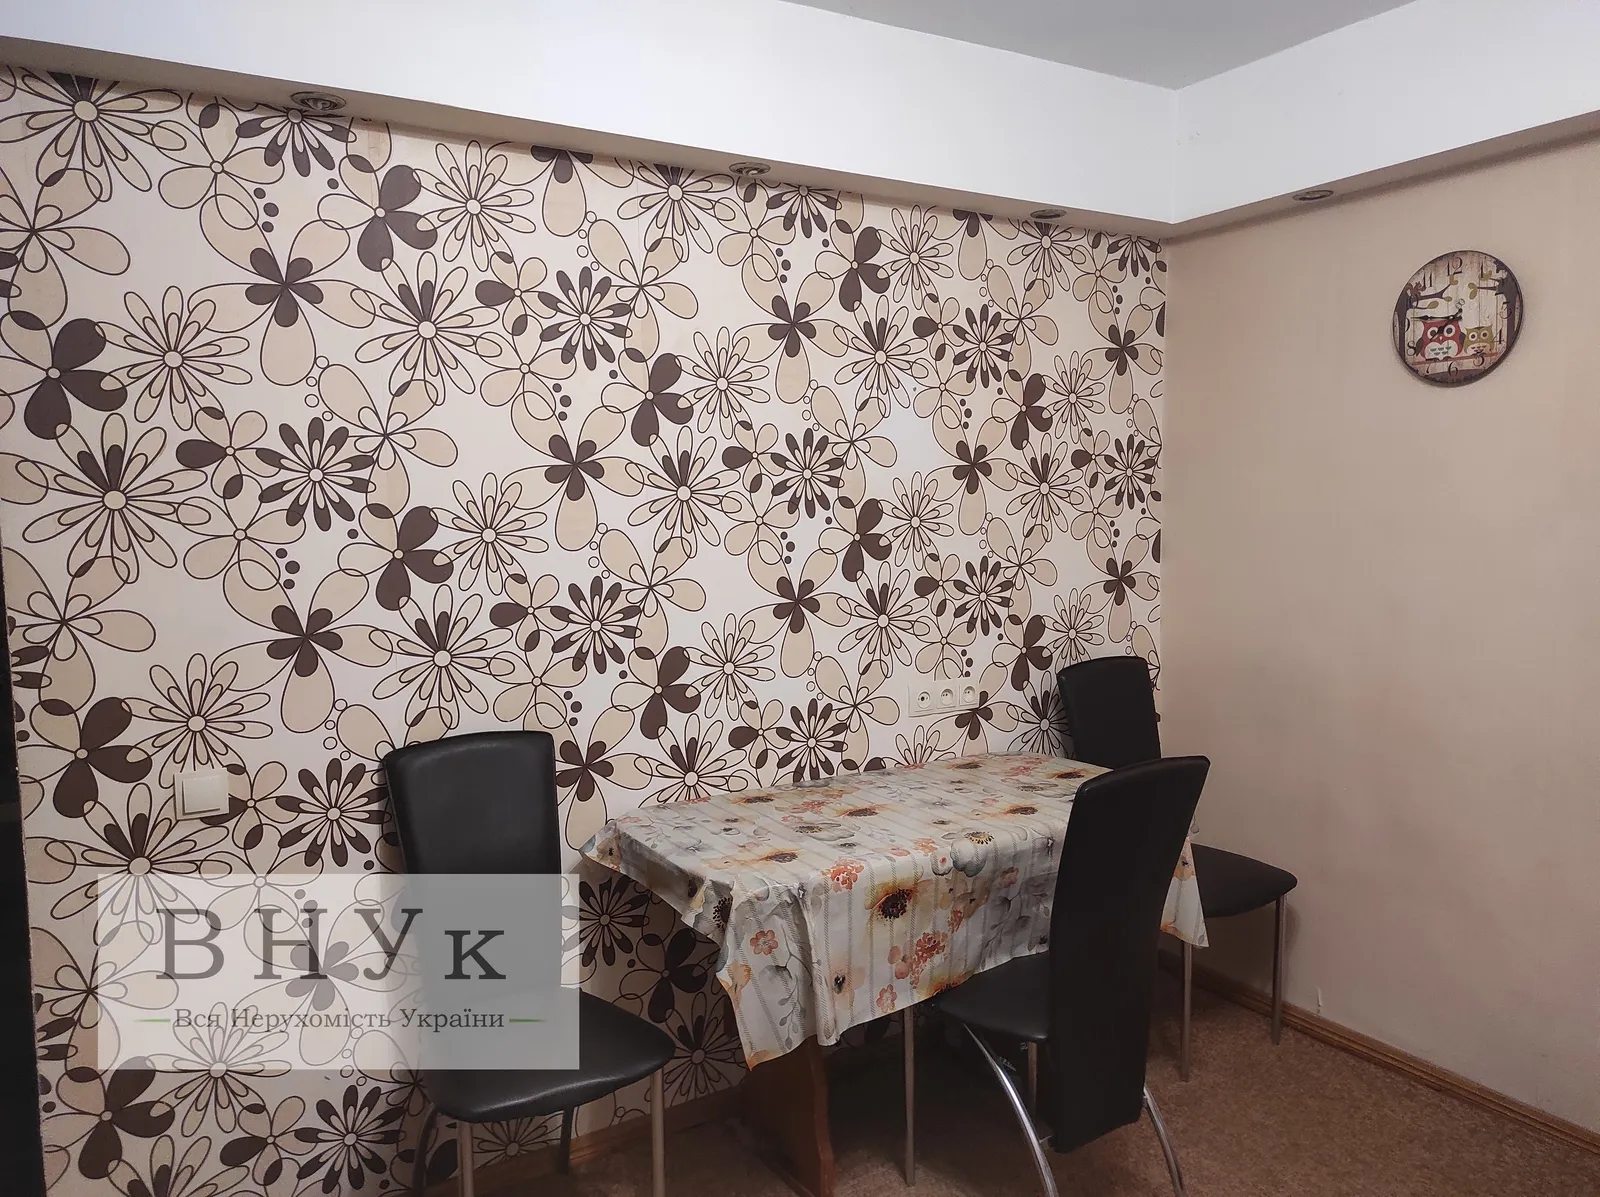 Apartments for sale. 3 rooms, 80 m², 1st floor/5 floors. Troleybusna vul., Ternopil. 